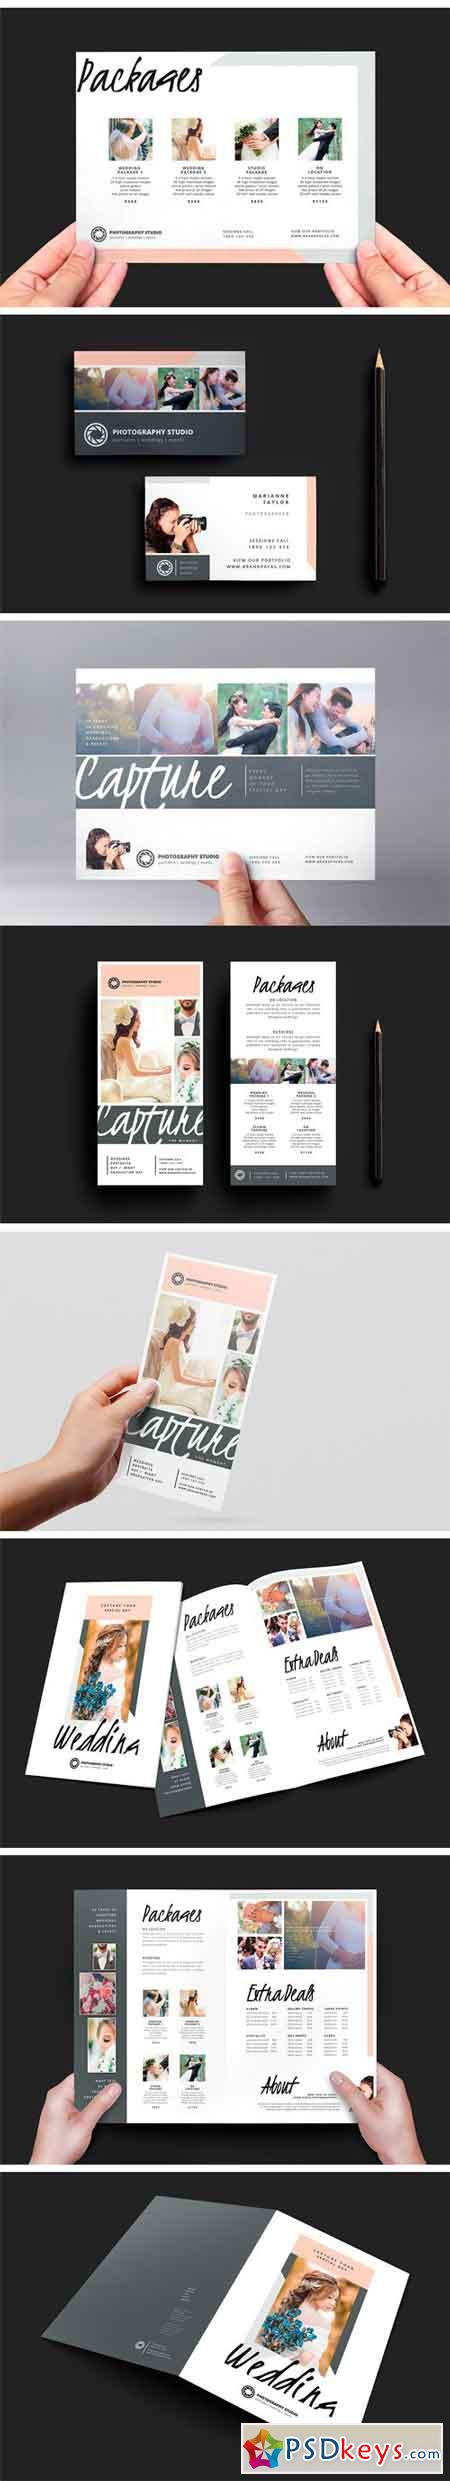 Wedding Photography Templates Pack 3 1347995